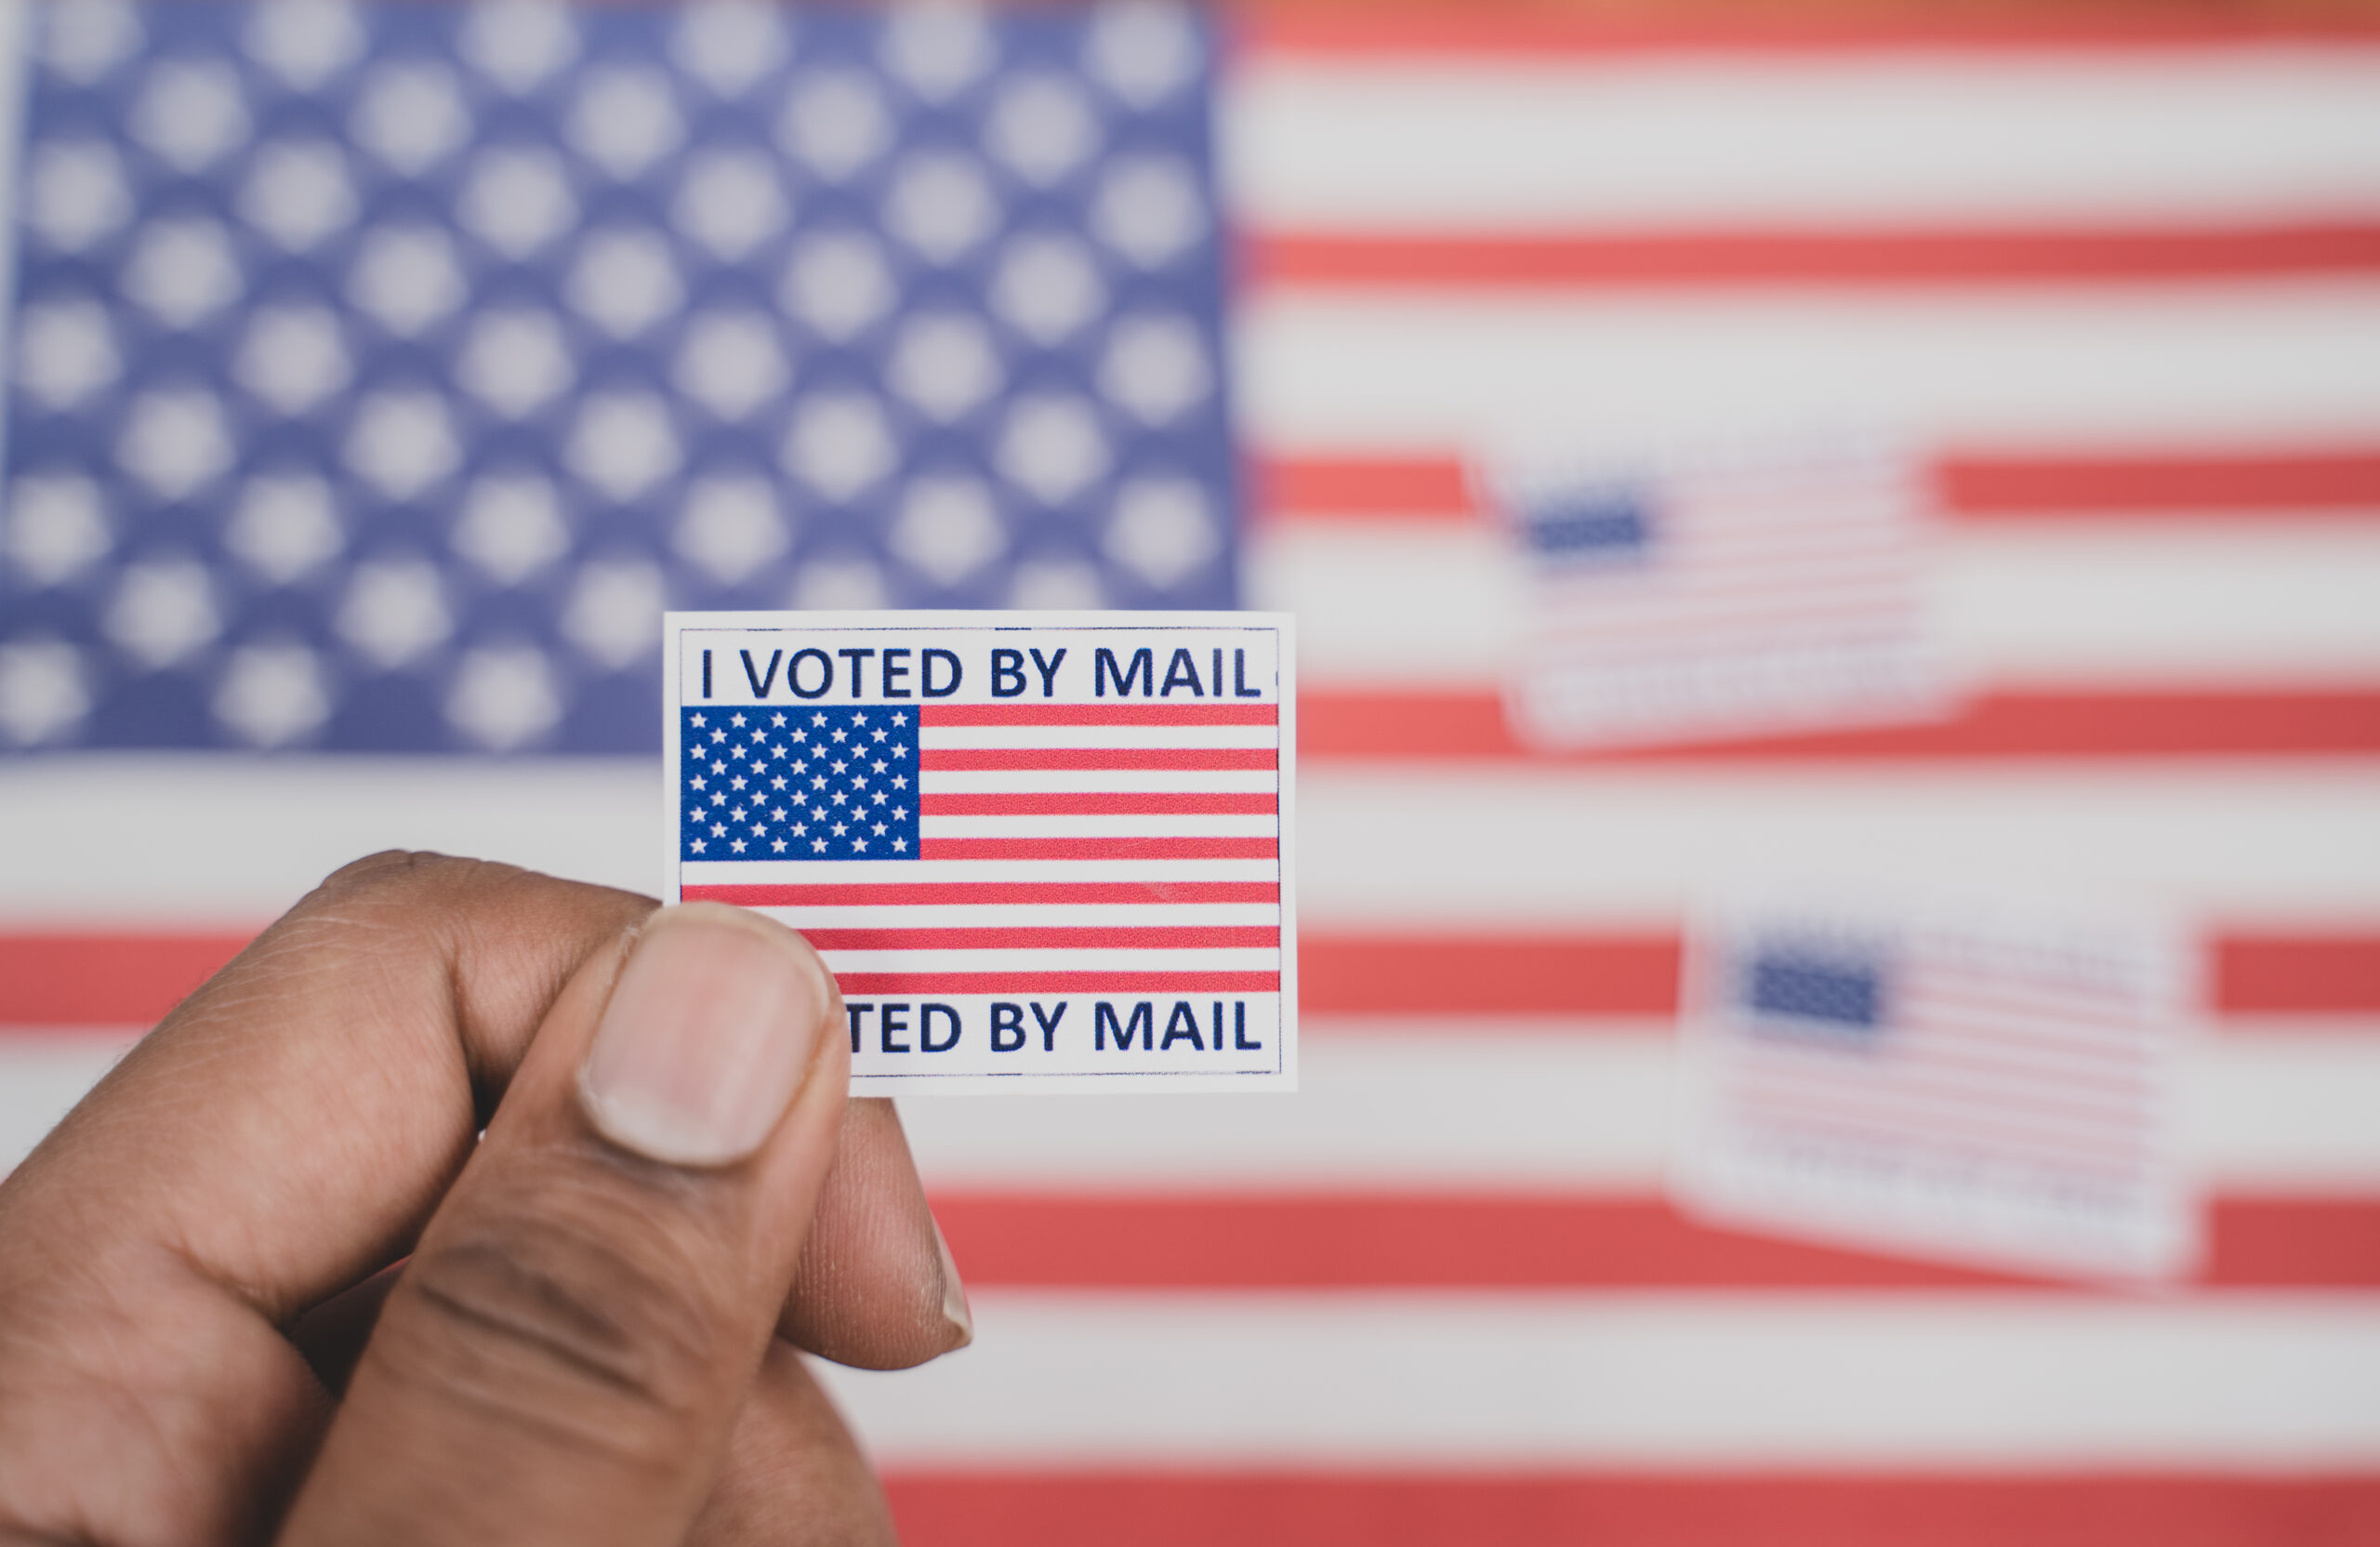 Mail-in Ballot in front of an American flag with an "I voted by mail" sticker